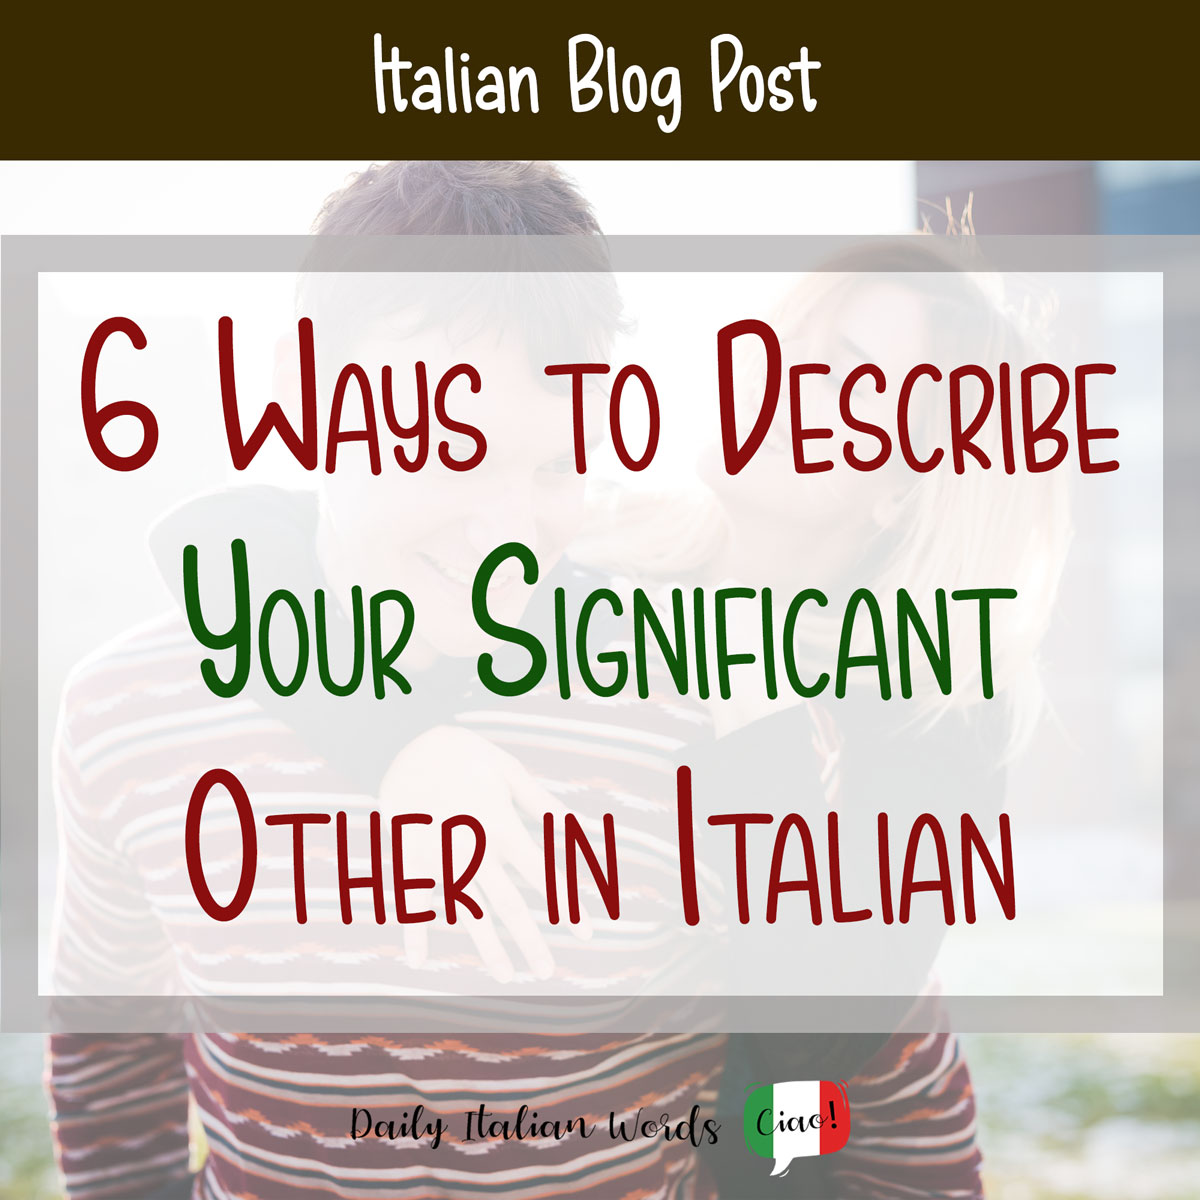 6 ways to describe your significant other in Italian